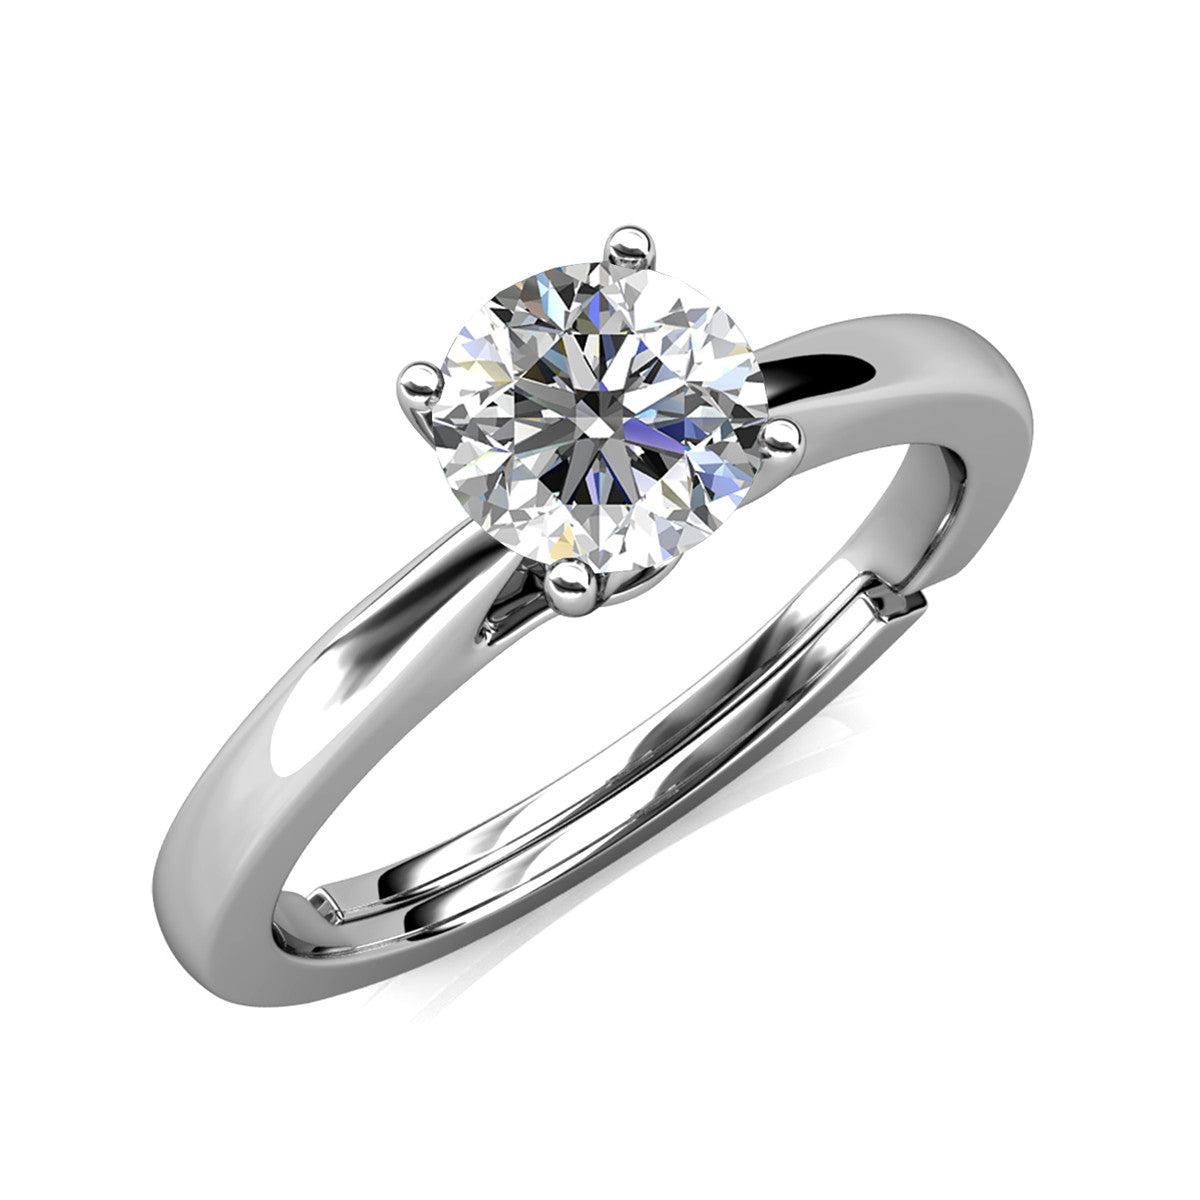 Moissanite by Cate & Chloe Abigail Sterling Silver Ring with Moissanite and 5A Cubic Zirconia Crystals